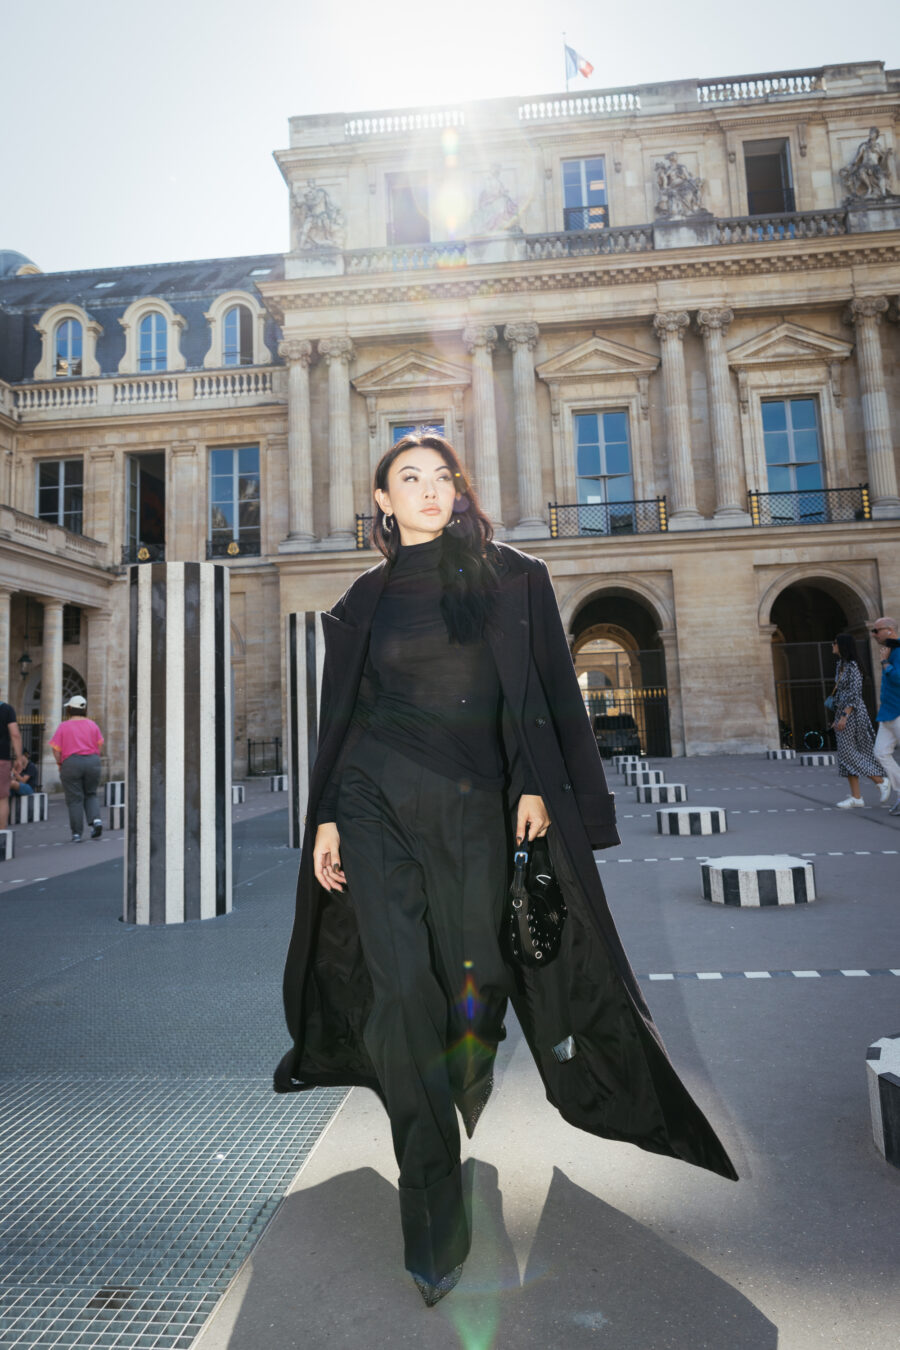 jessica wang wearing a black gucci outfit in paris // Jessica Wang - Notjessfashion